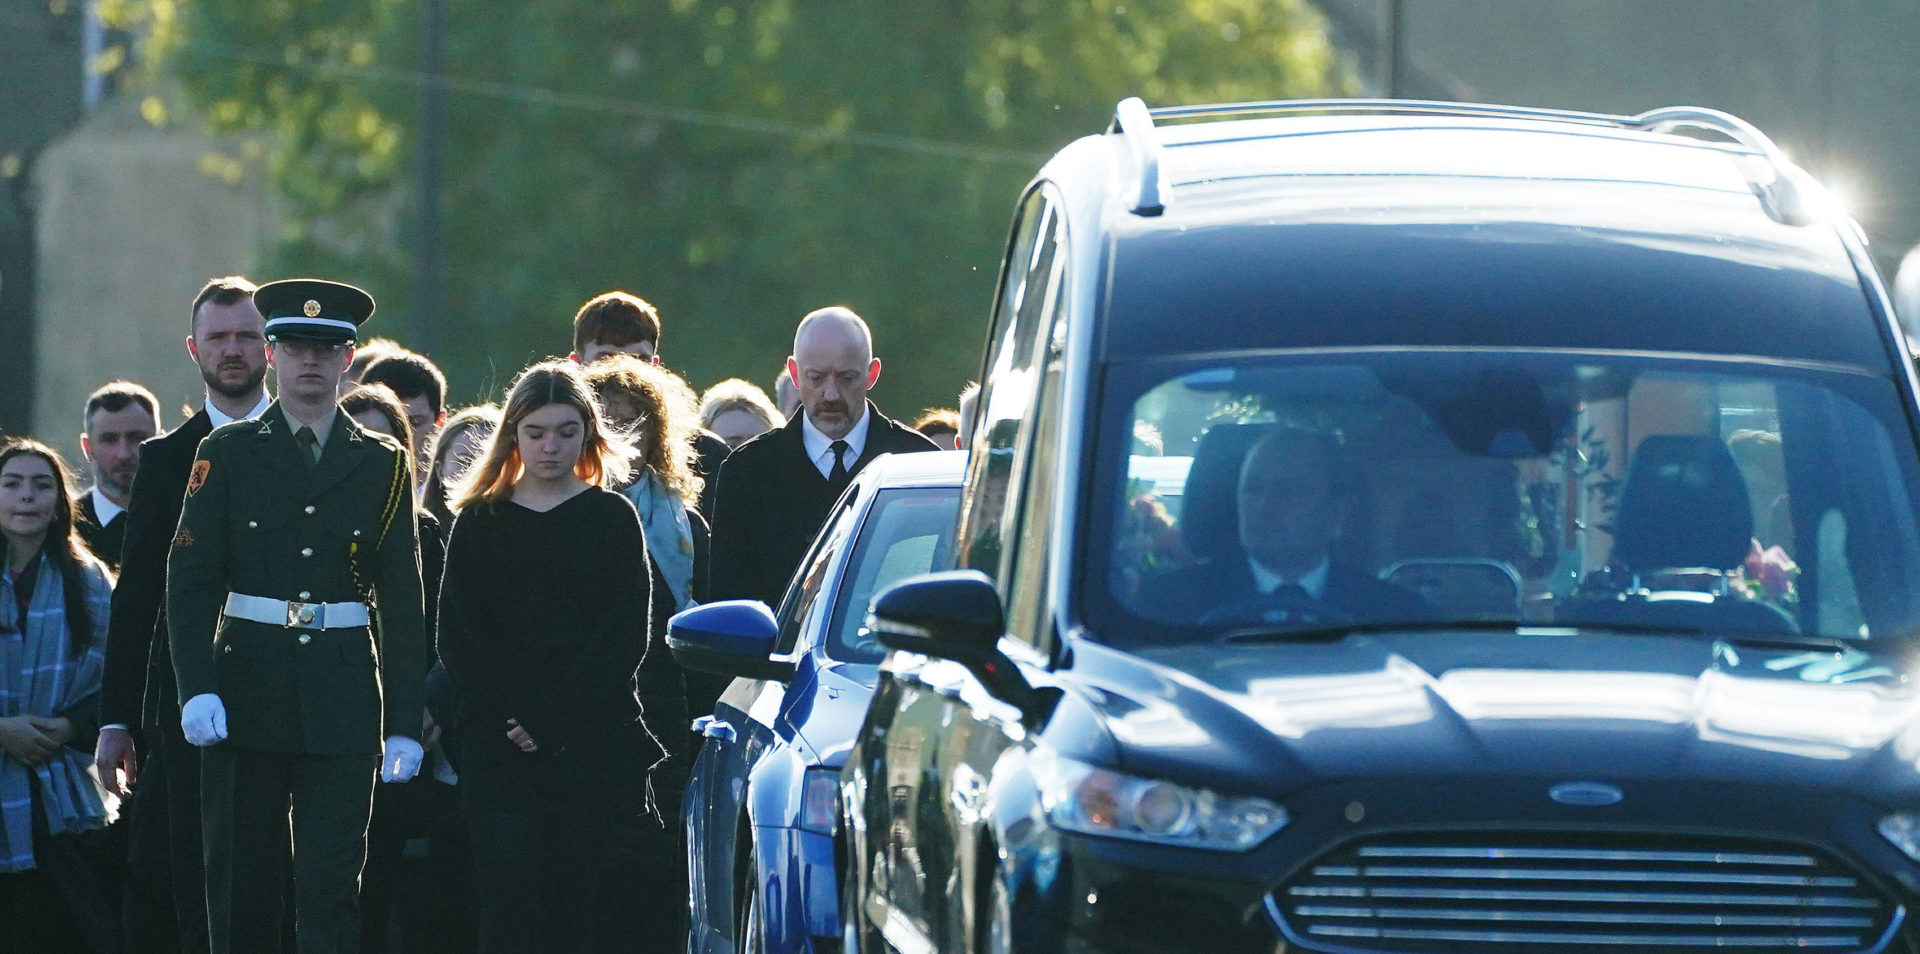 Family and mourners walk behind the hearse carrying the coffin of 49-year-old mother of four Martina Martin, 13-10-2022. Image: PA Images / Alamy